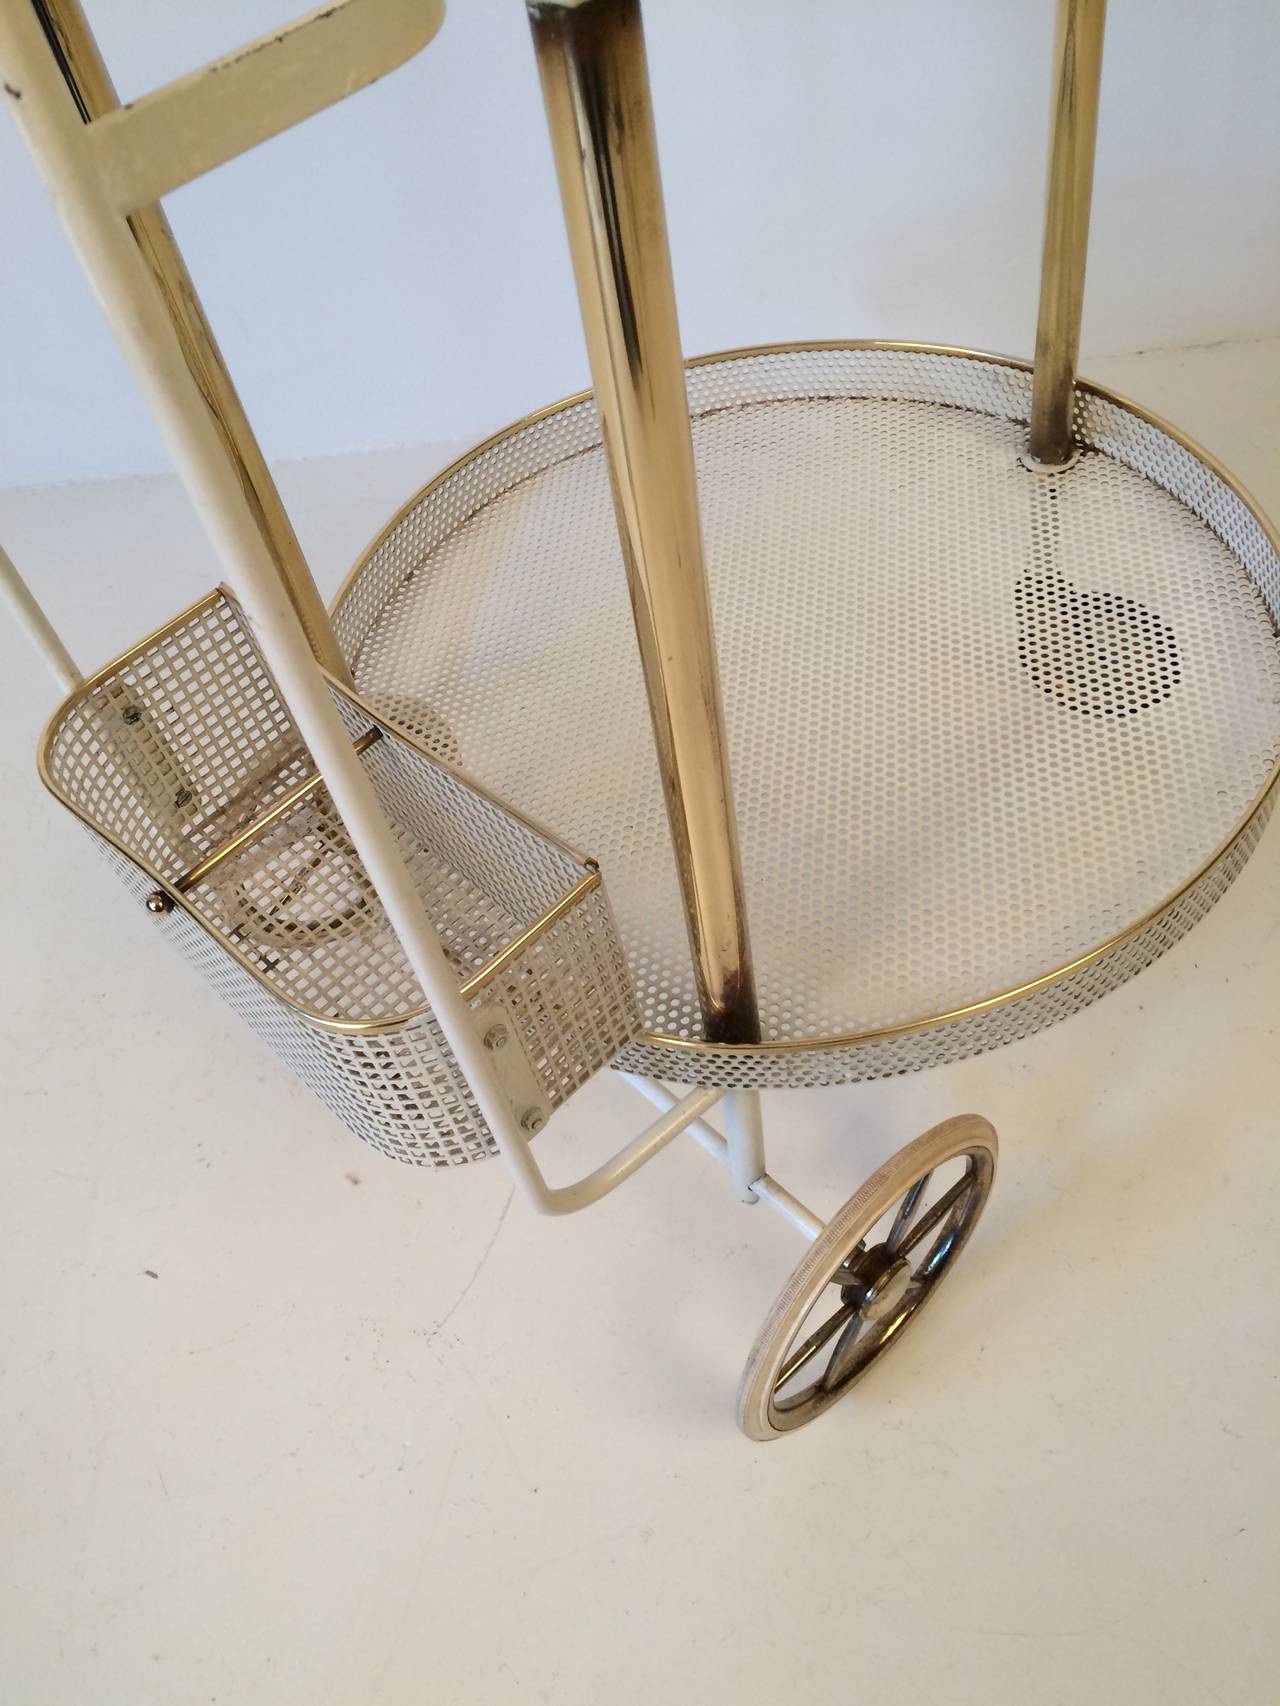 Beautiful 1950s white, gold and brass bar trolley.

This trolley is made of perforated metal sheets. The upper tray has a gold-plated glass inlay.

Measurements: H 84 x W 48 x D 58.